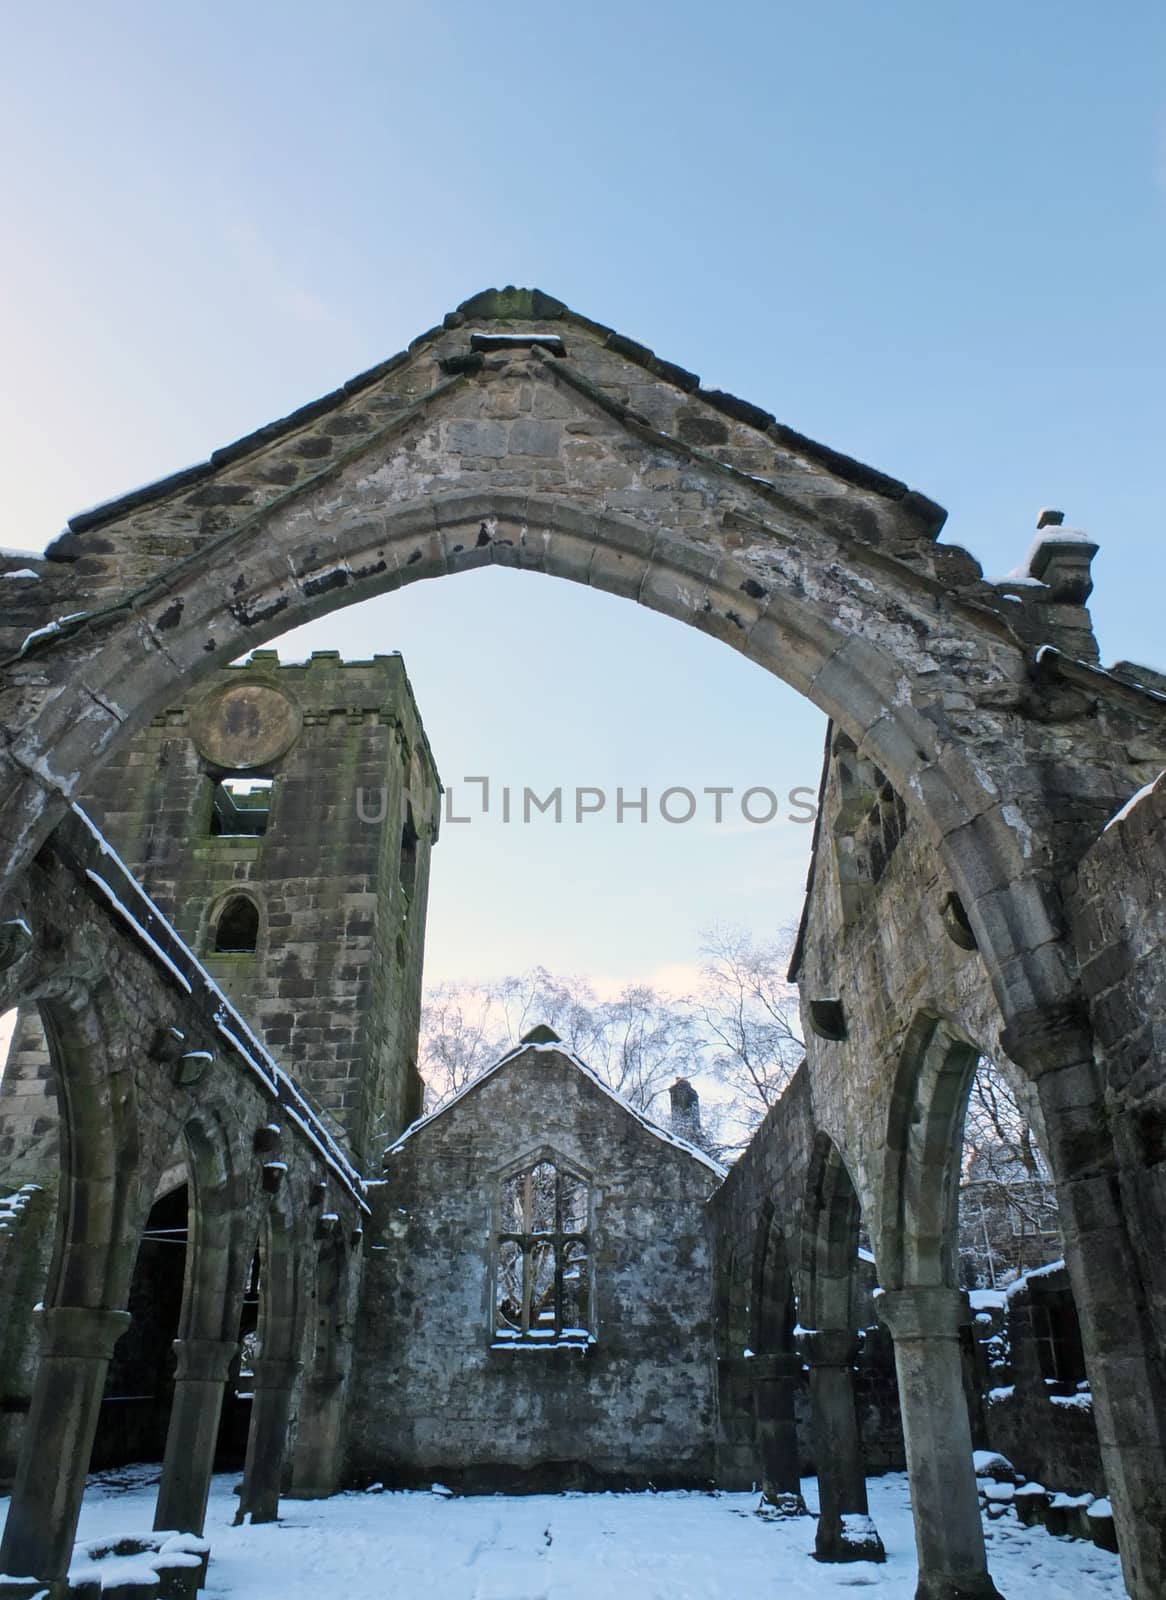 the medieval ruined church in heptonstall covered in snow showing arches and columns against a blue winter sky